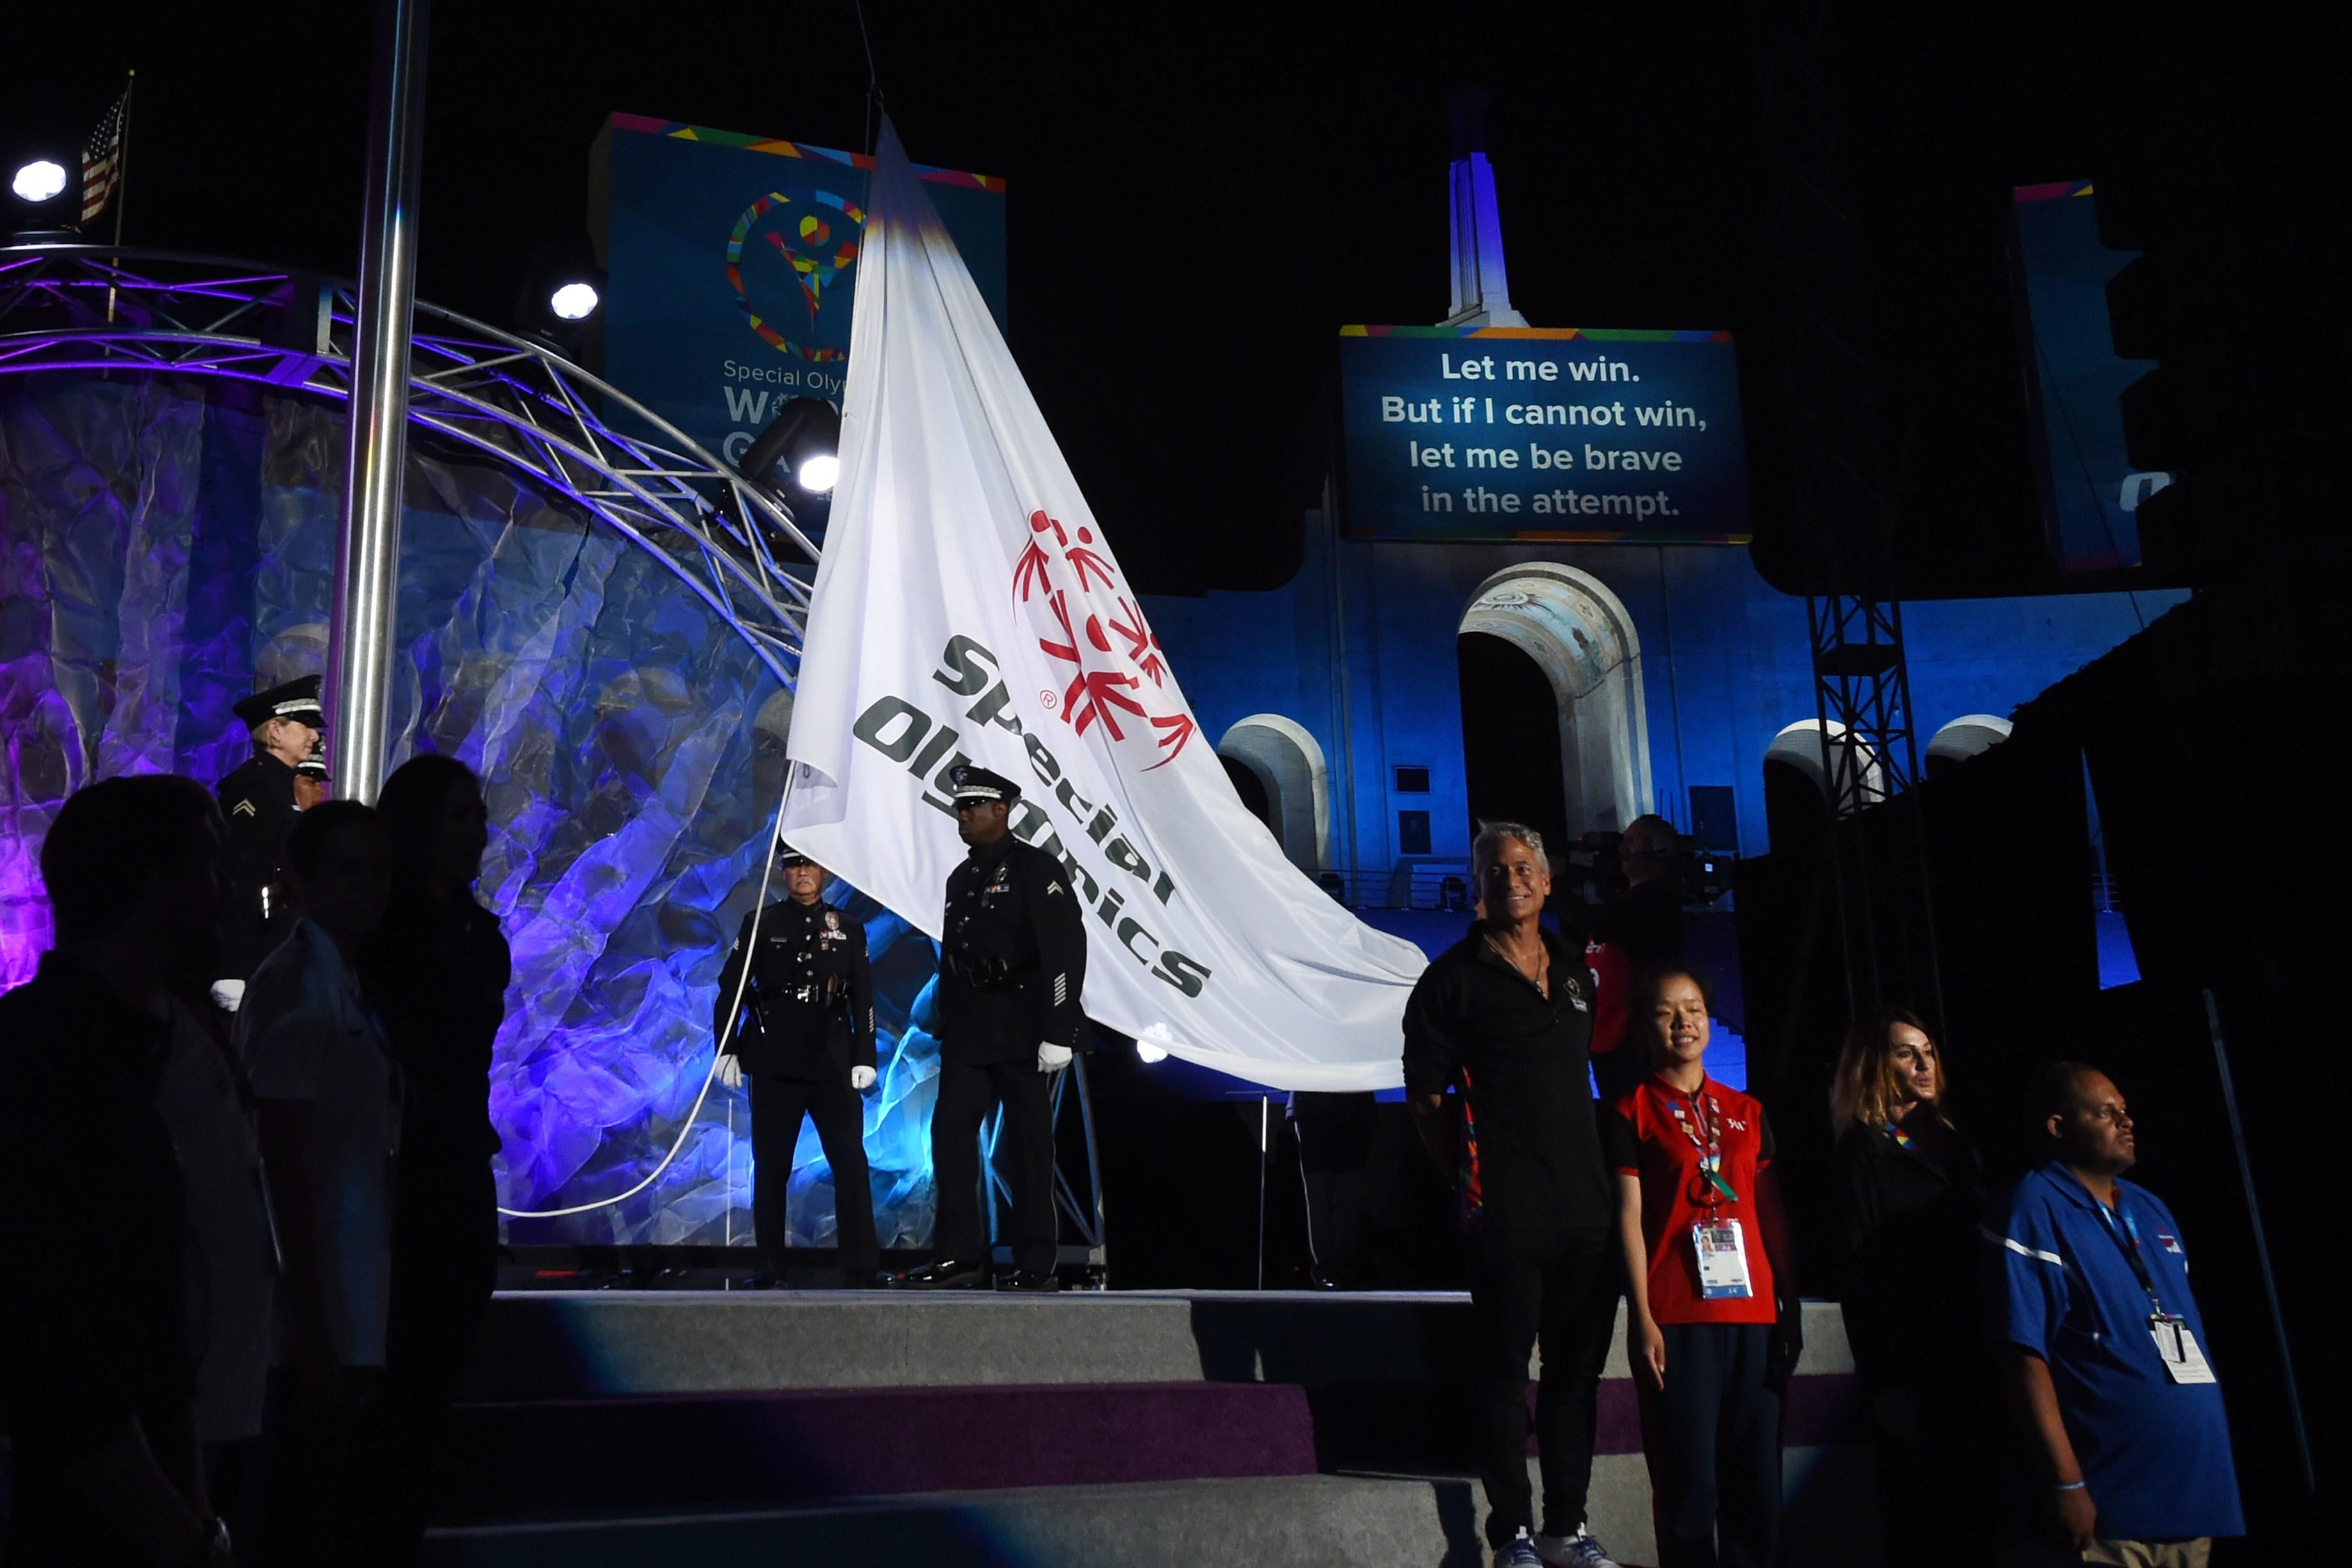 The Special Olympics flag is raised at the opening ceremony of the 2015 Special Olympics World Games.